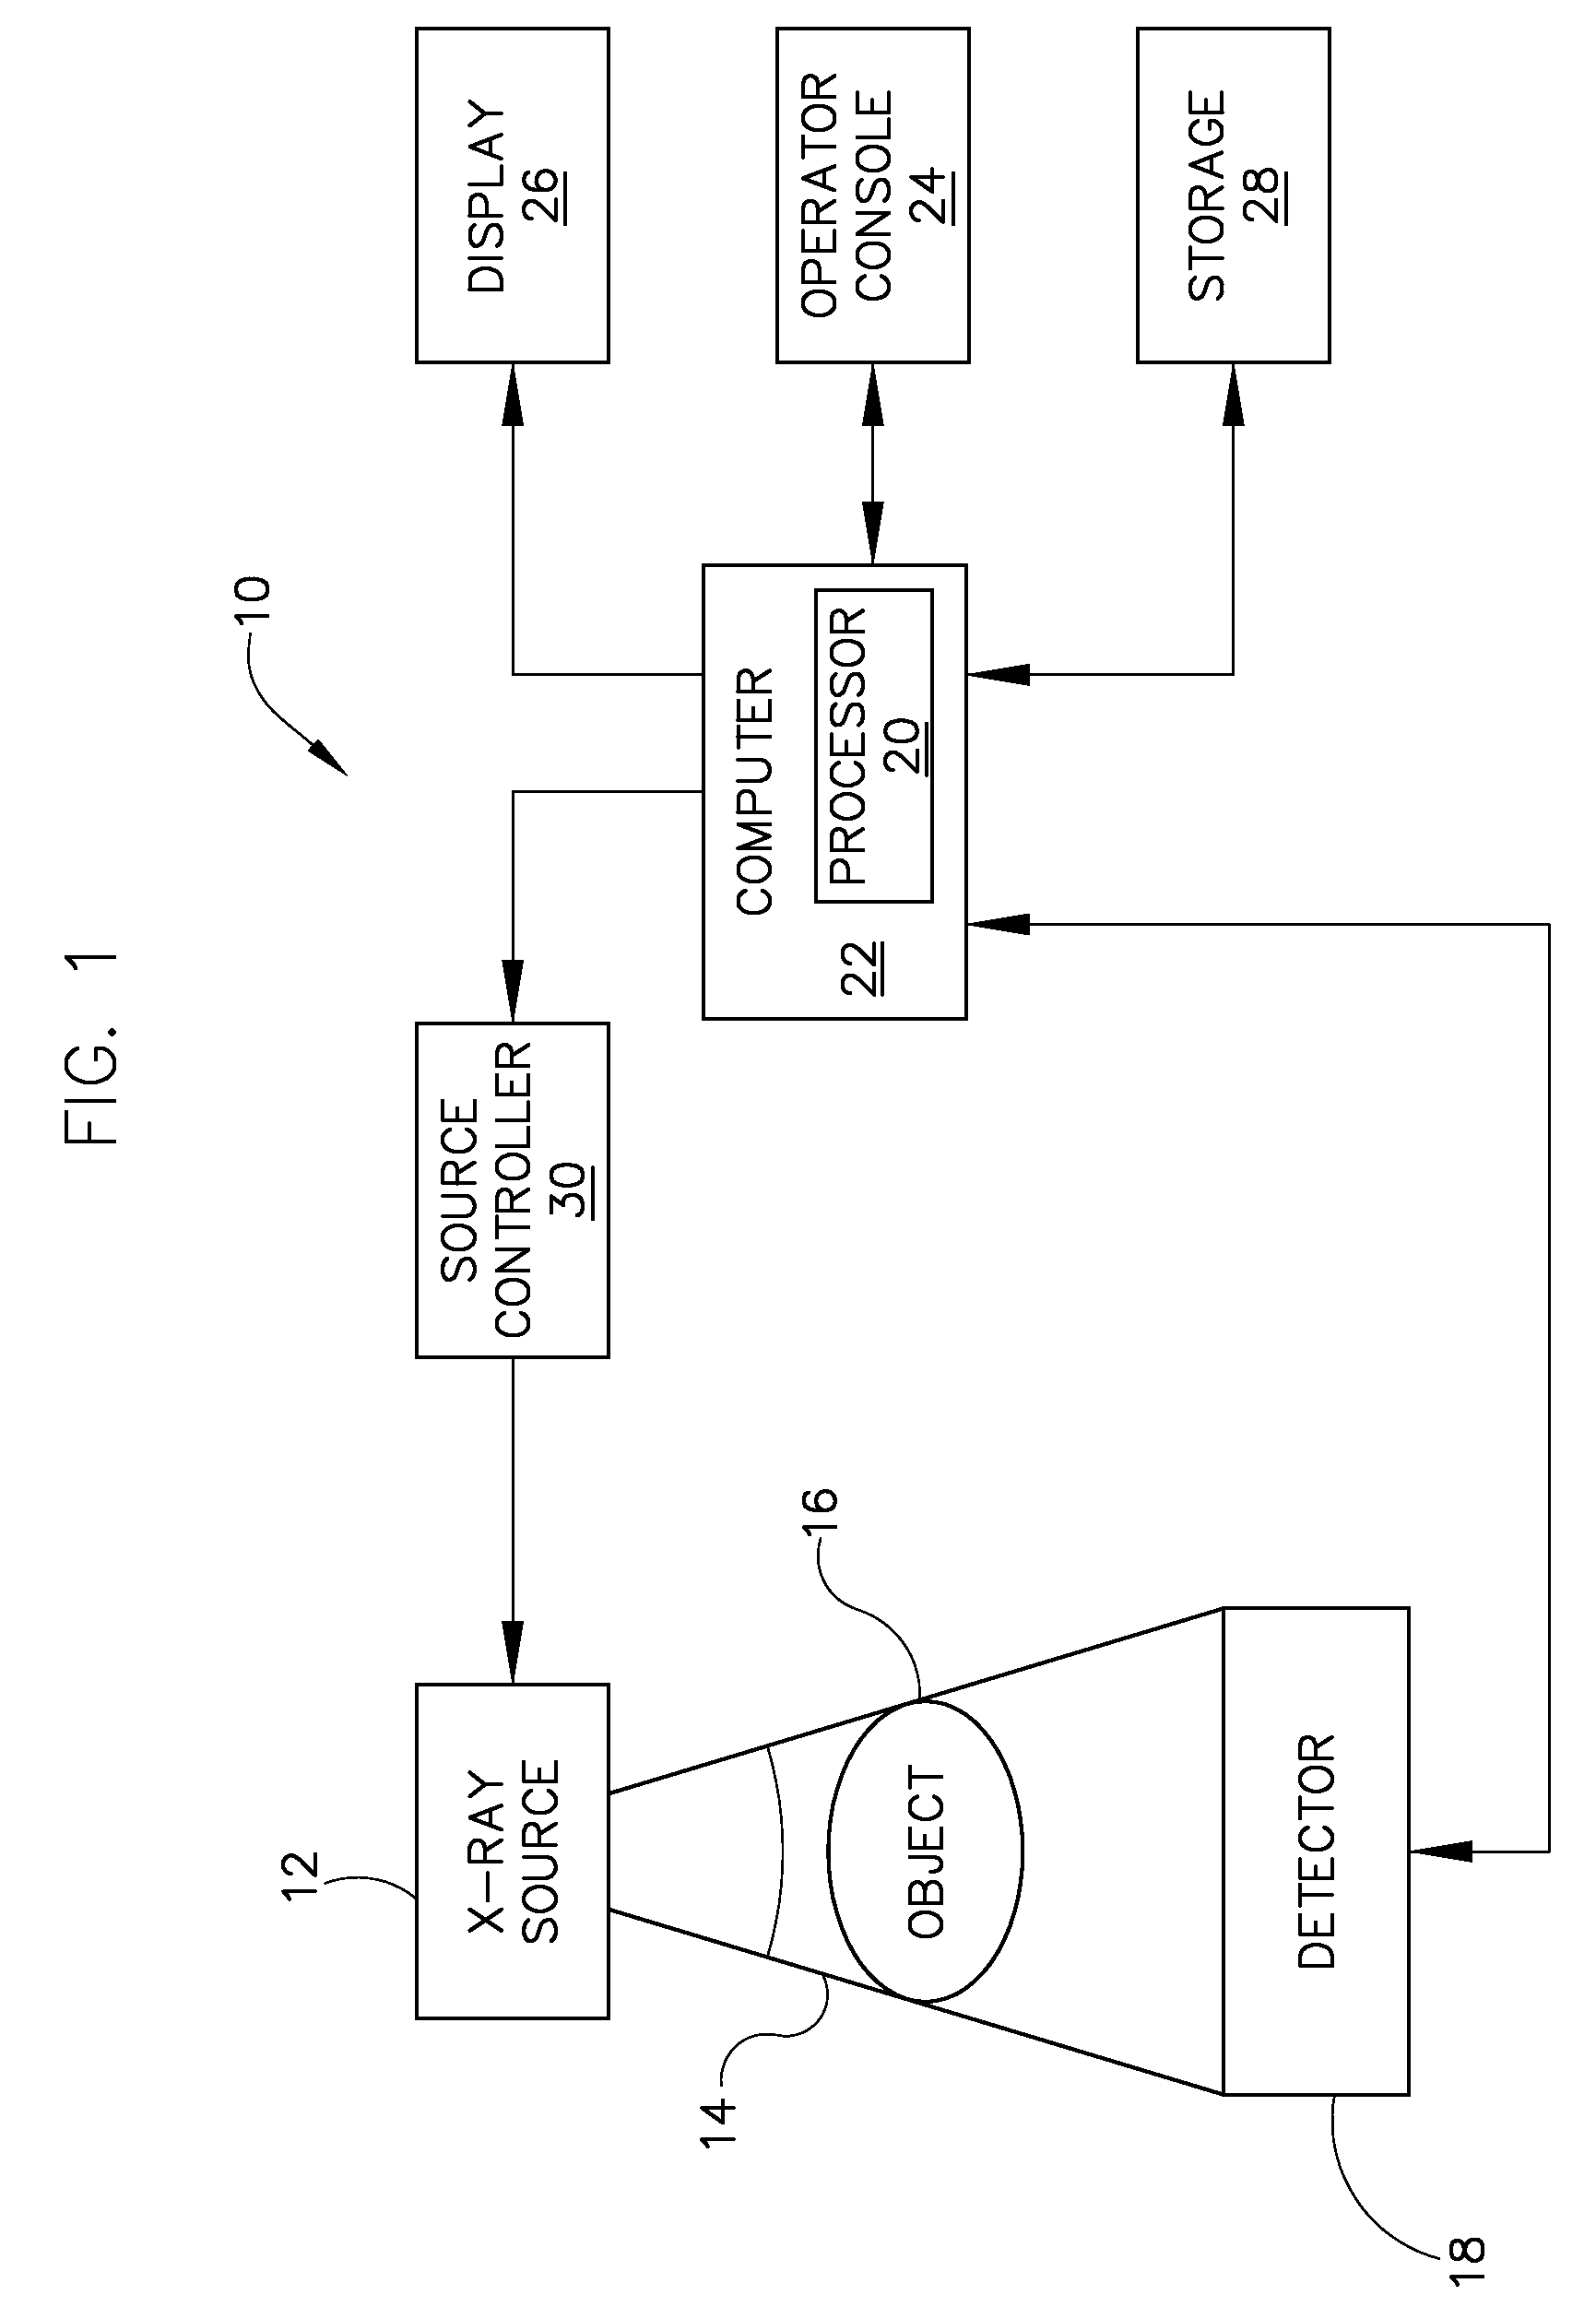 Apparatus for reducing KV-dependent artifacts in an imaging system and method of making same